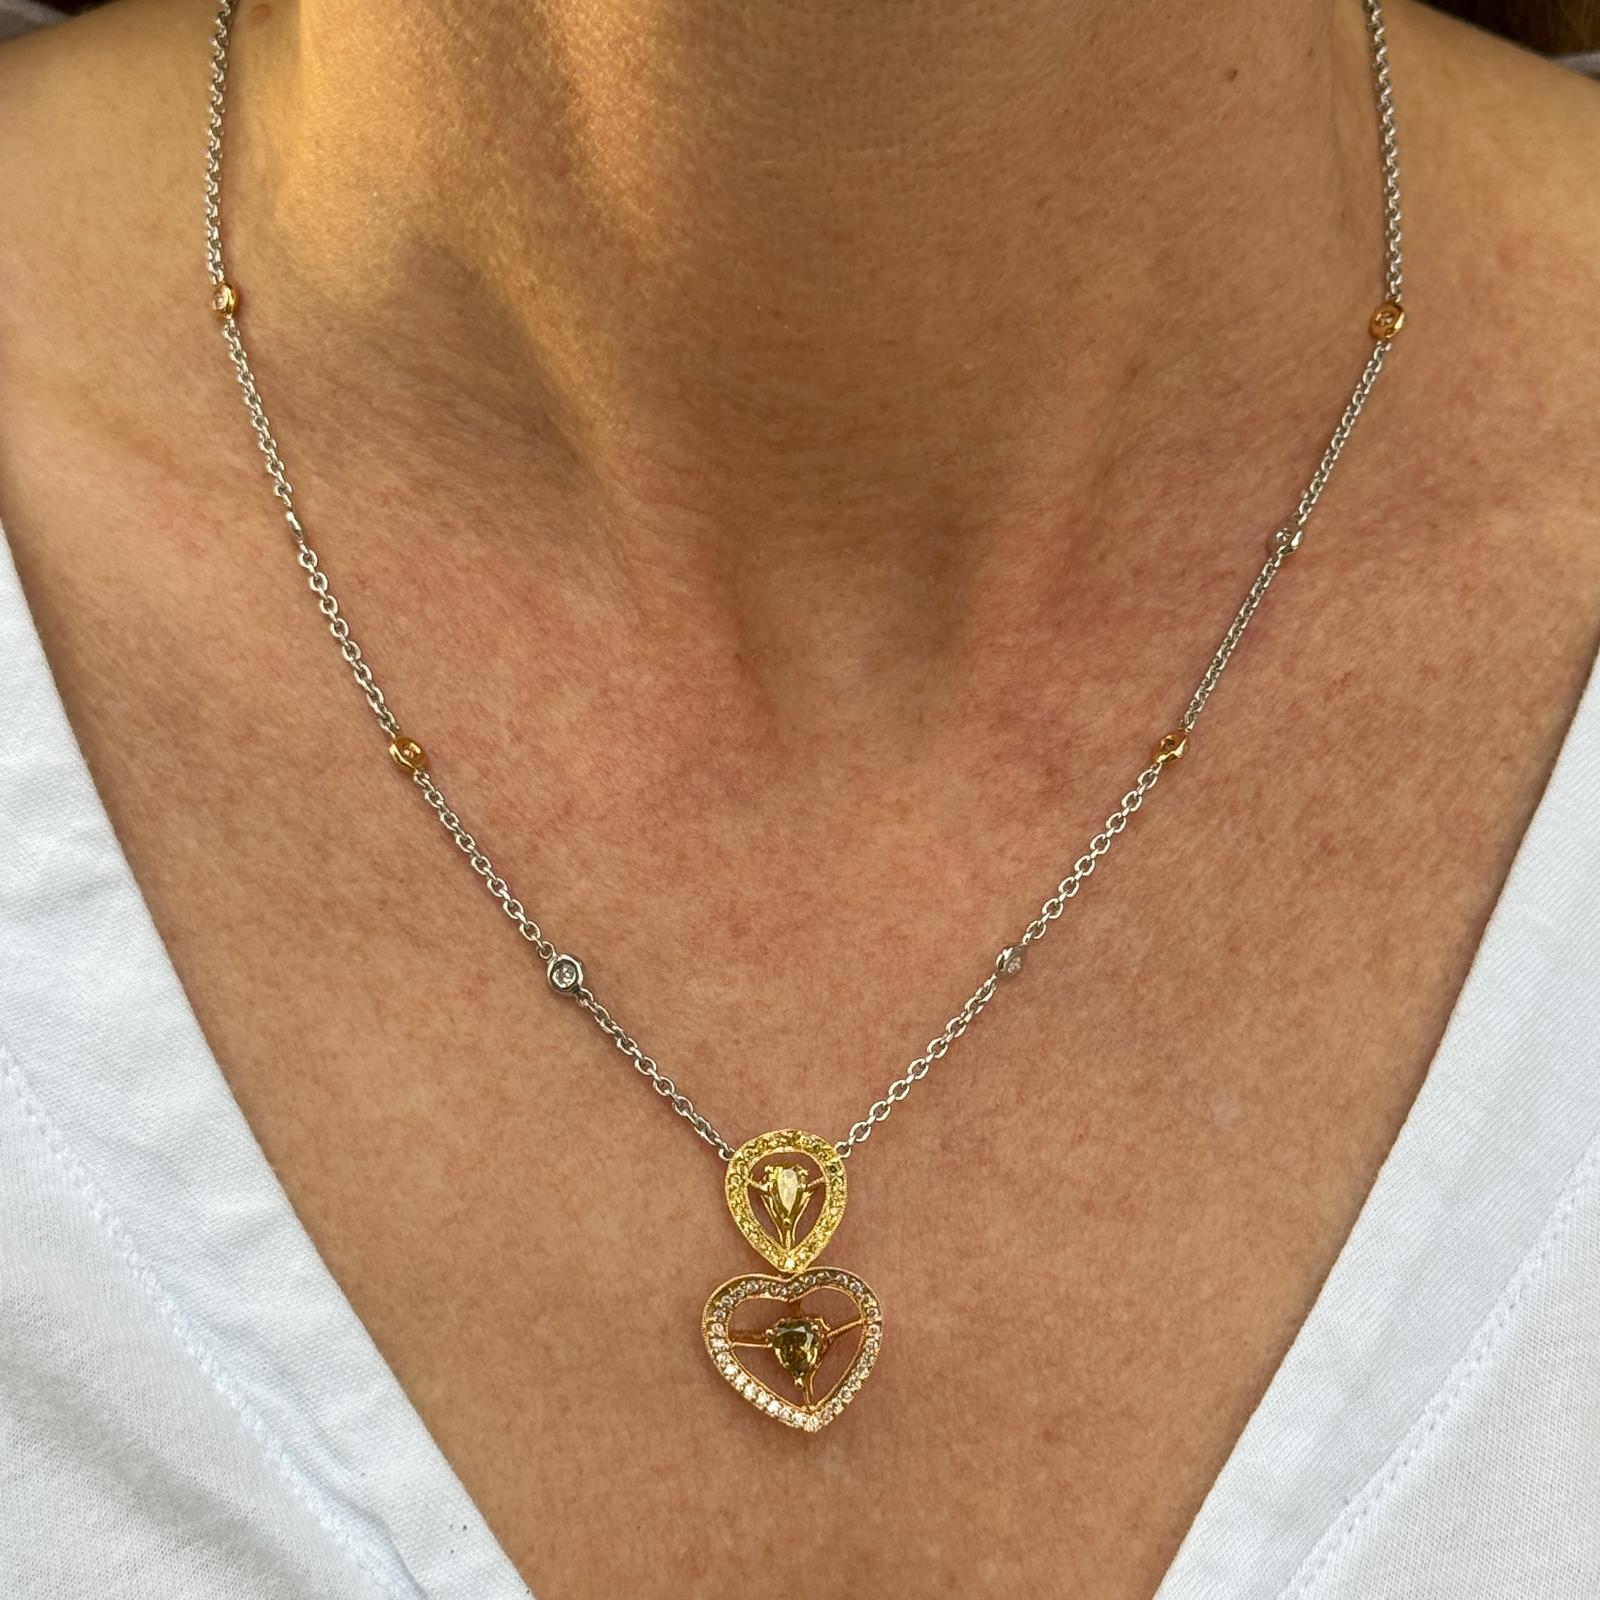 Colorful diamond heart pendant drop necklace crafted in 18 karat white and rose gold. The necklace features an approximately .50  carat pear shape champagne diamond, a .20 carat pear shape yellow diamond, and another .53 CTW of white and yellow